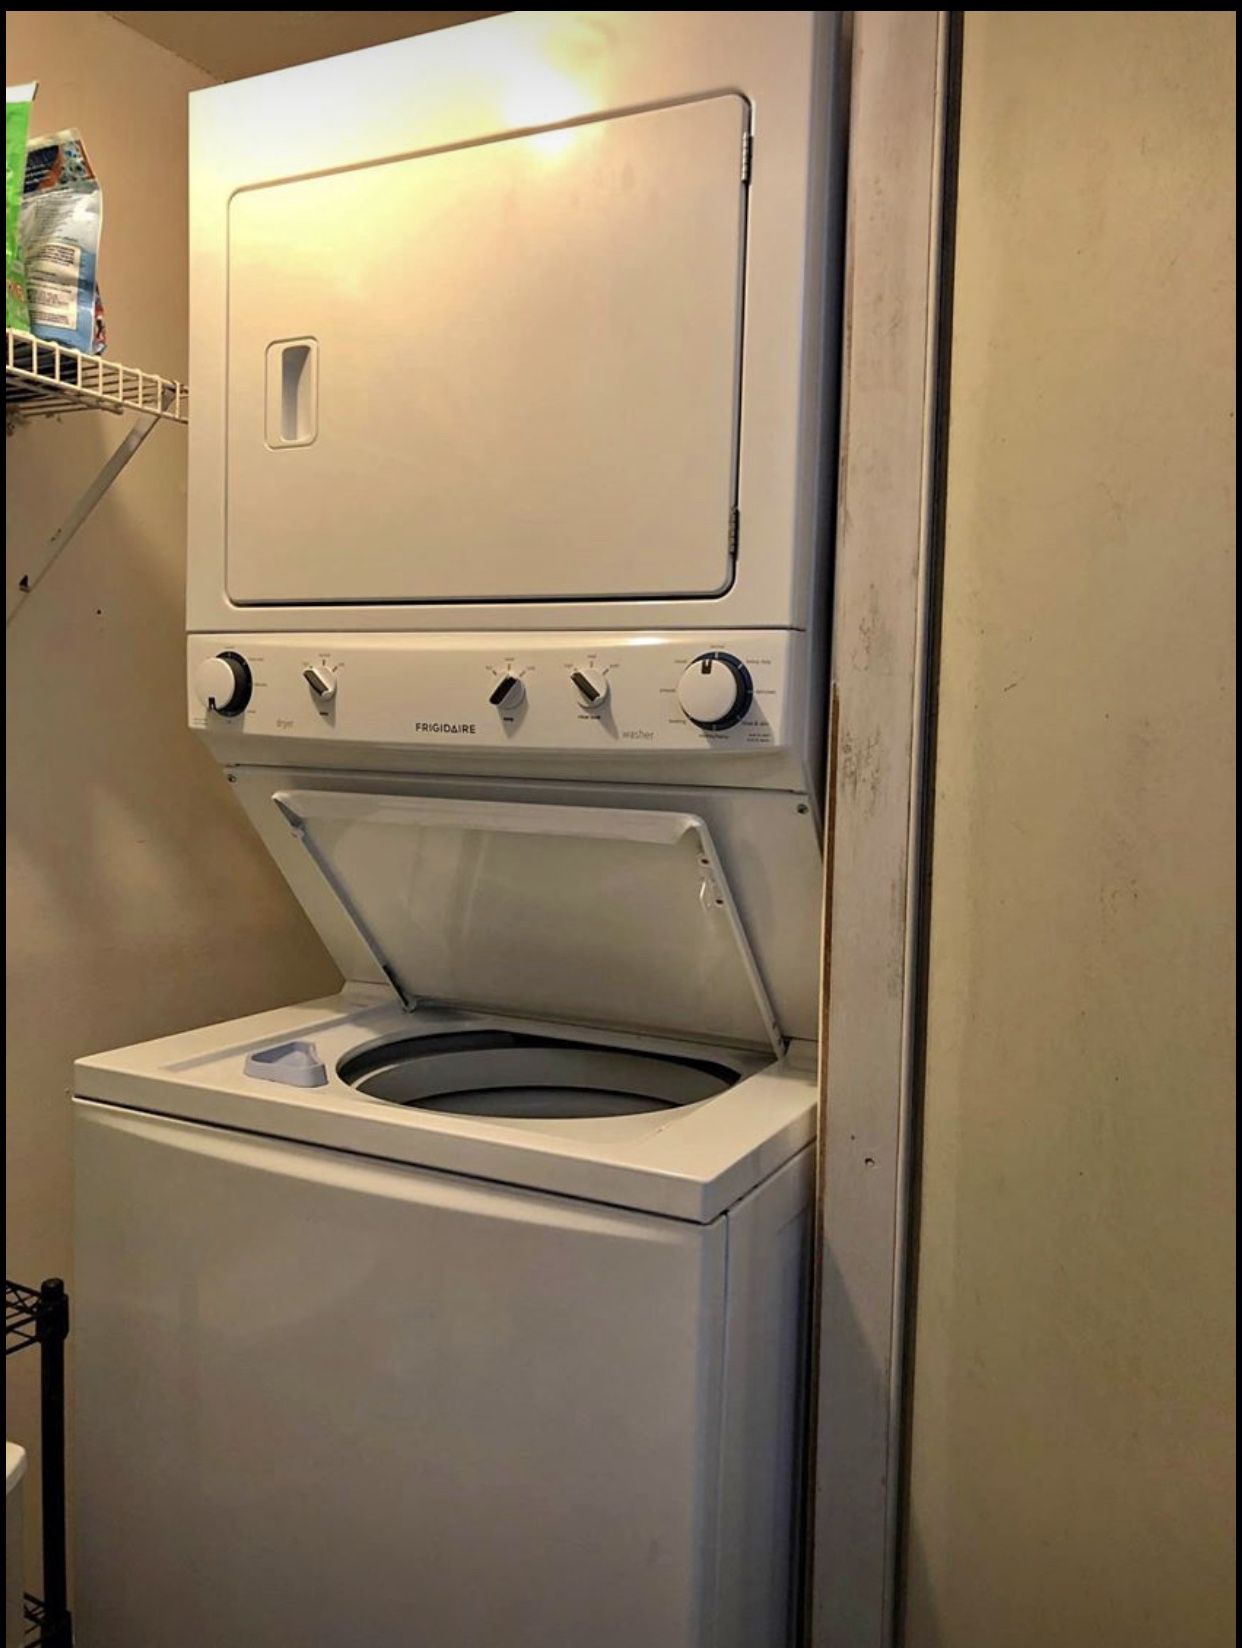 Brand new electric washer and dryer